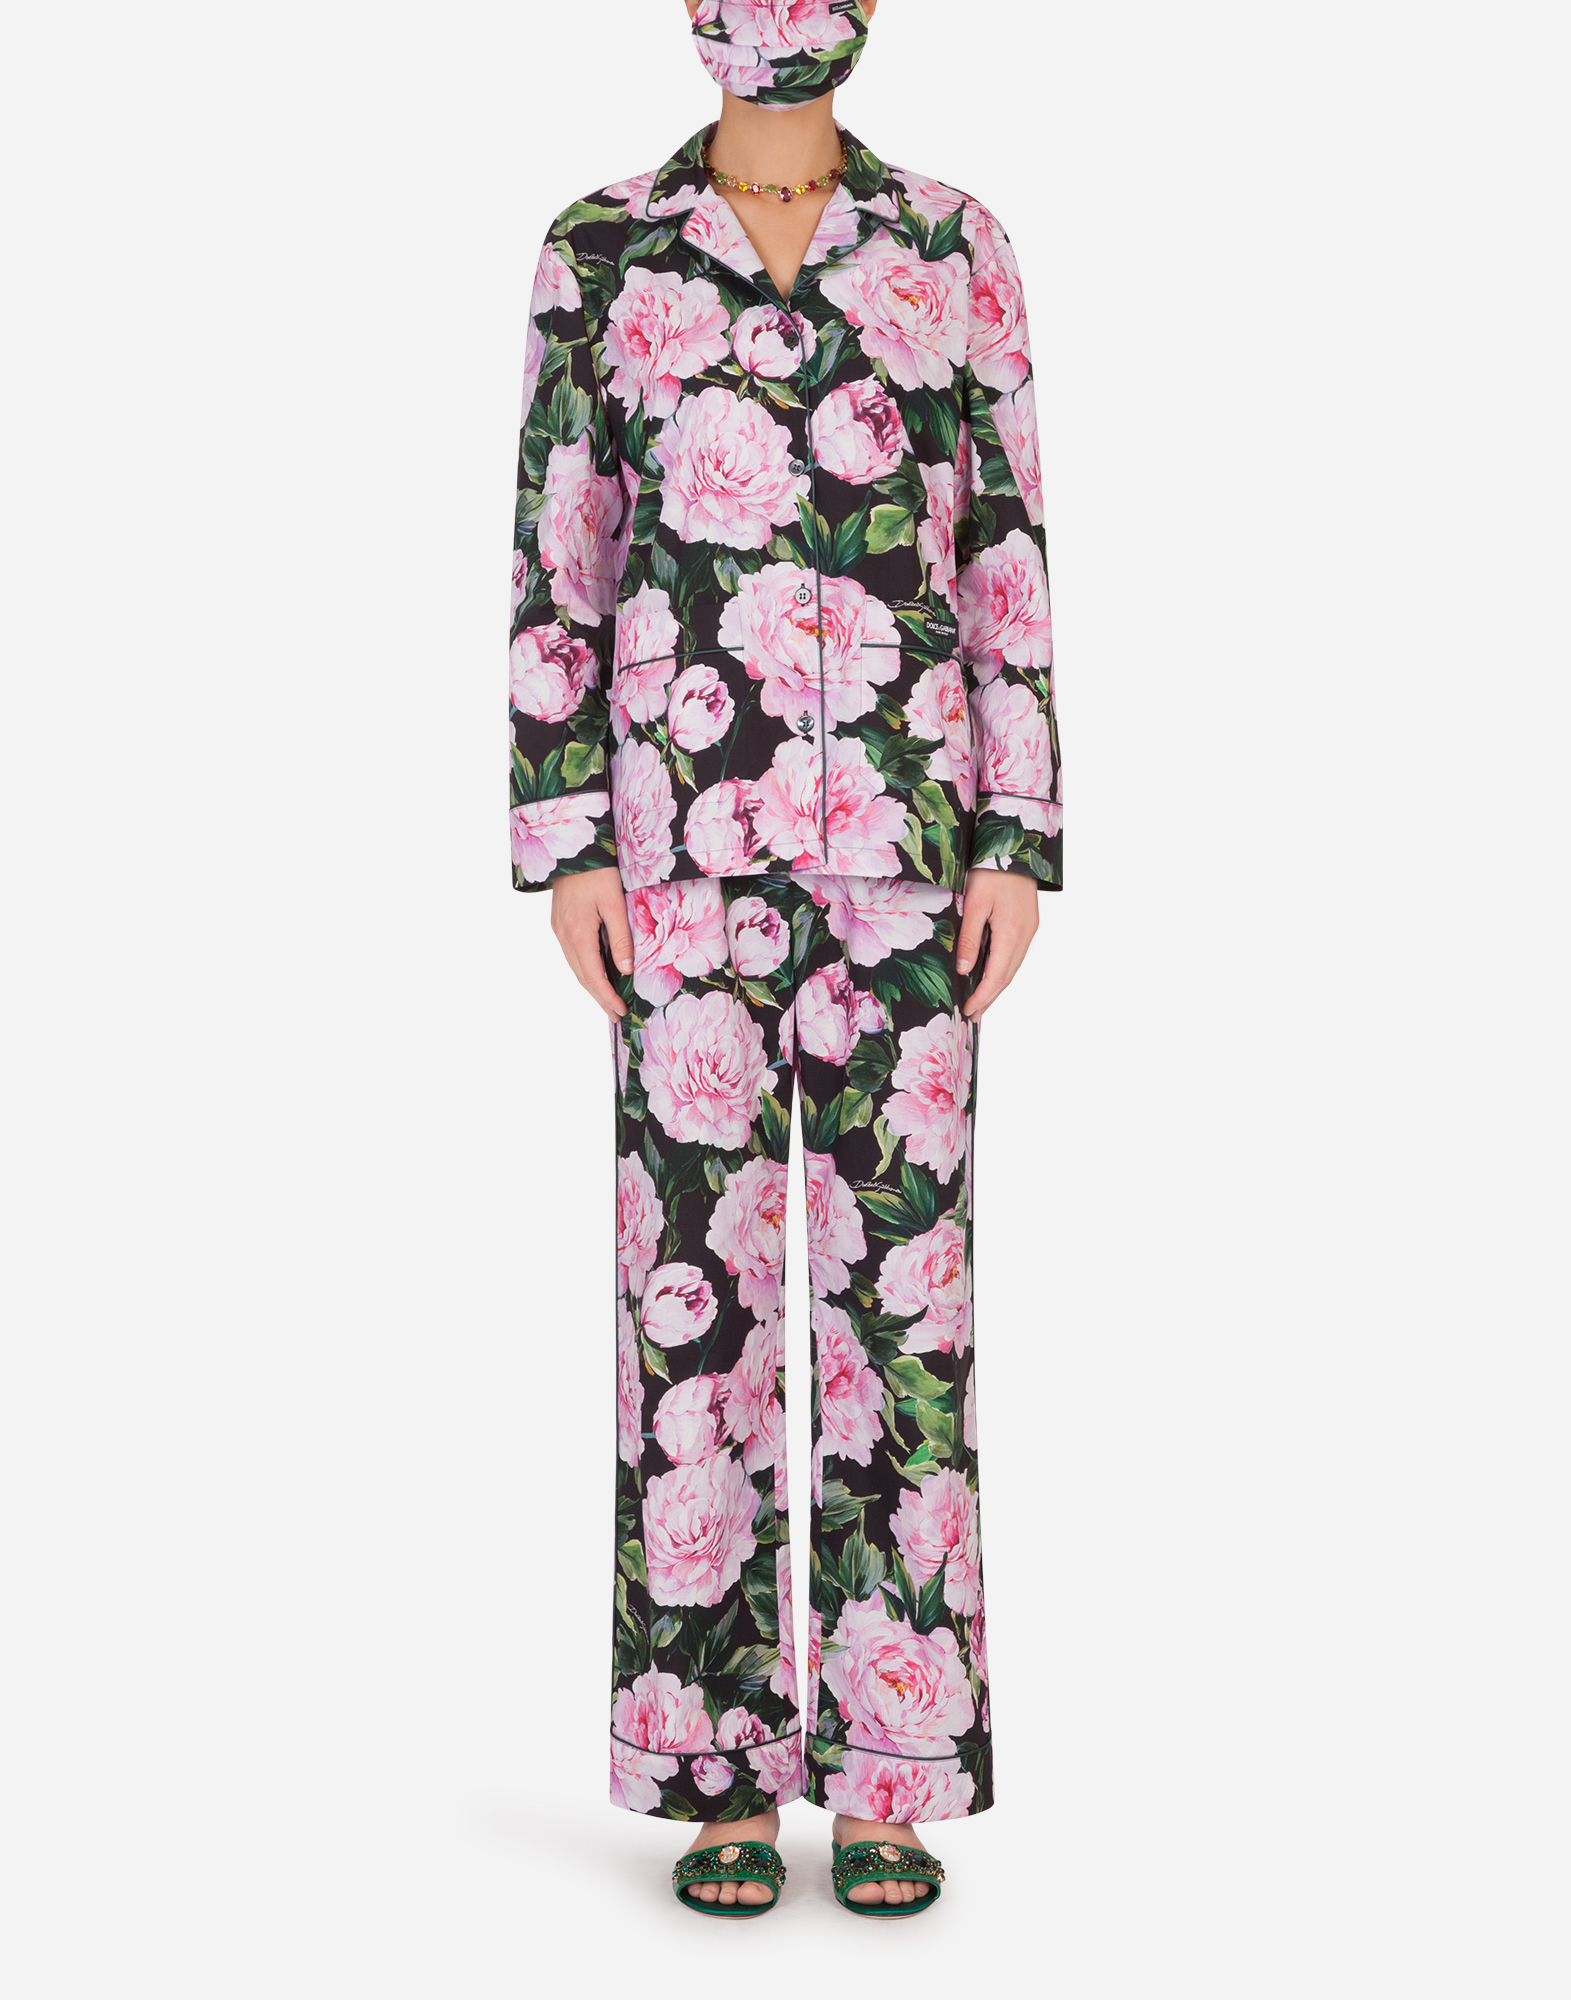 Peony-print pajama set with matching face mask in Floral Print